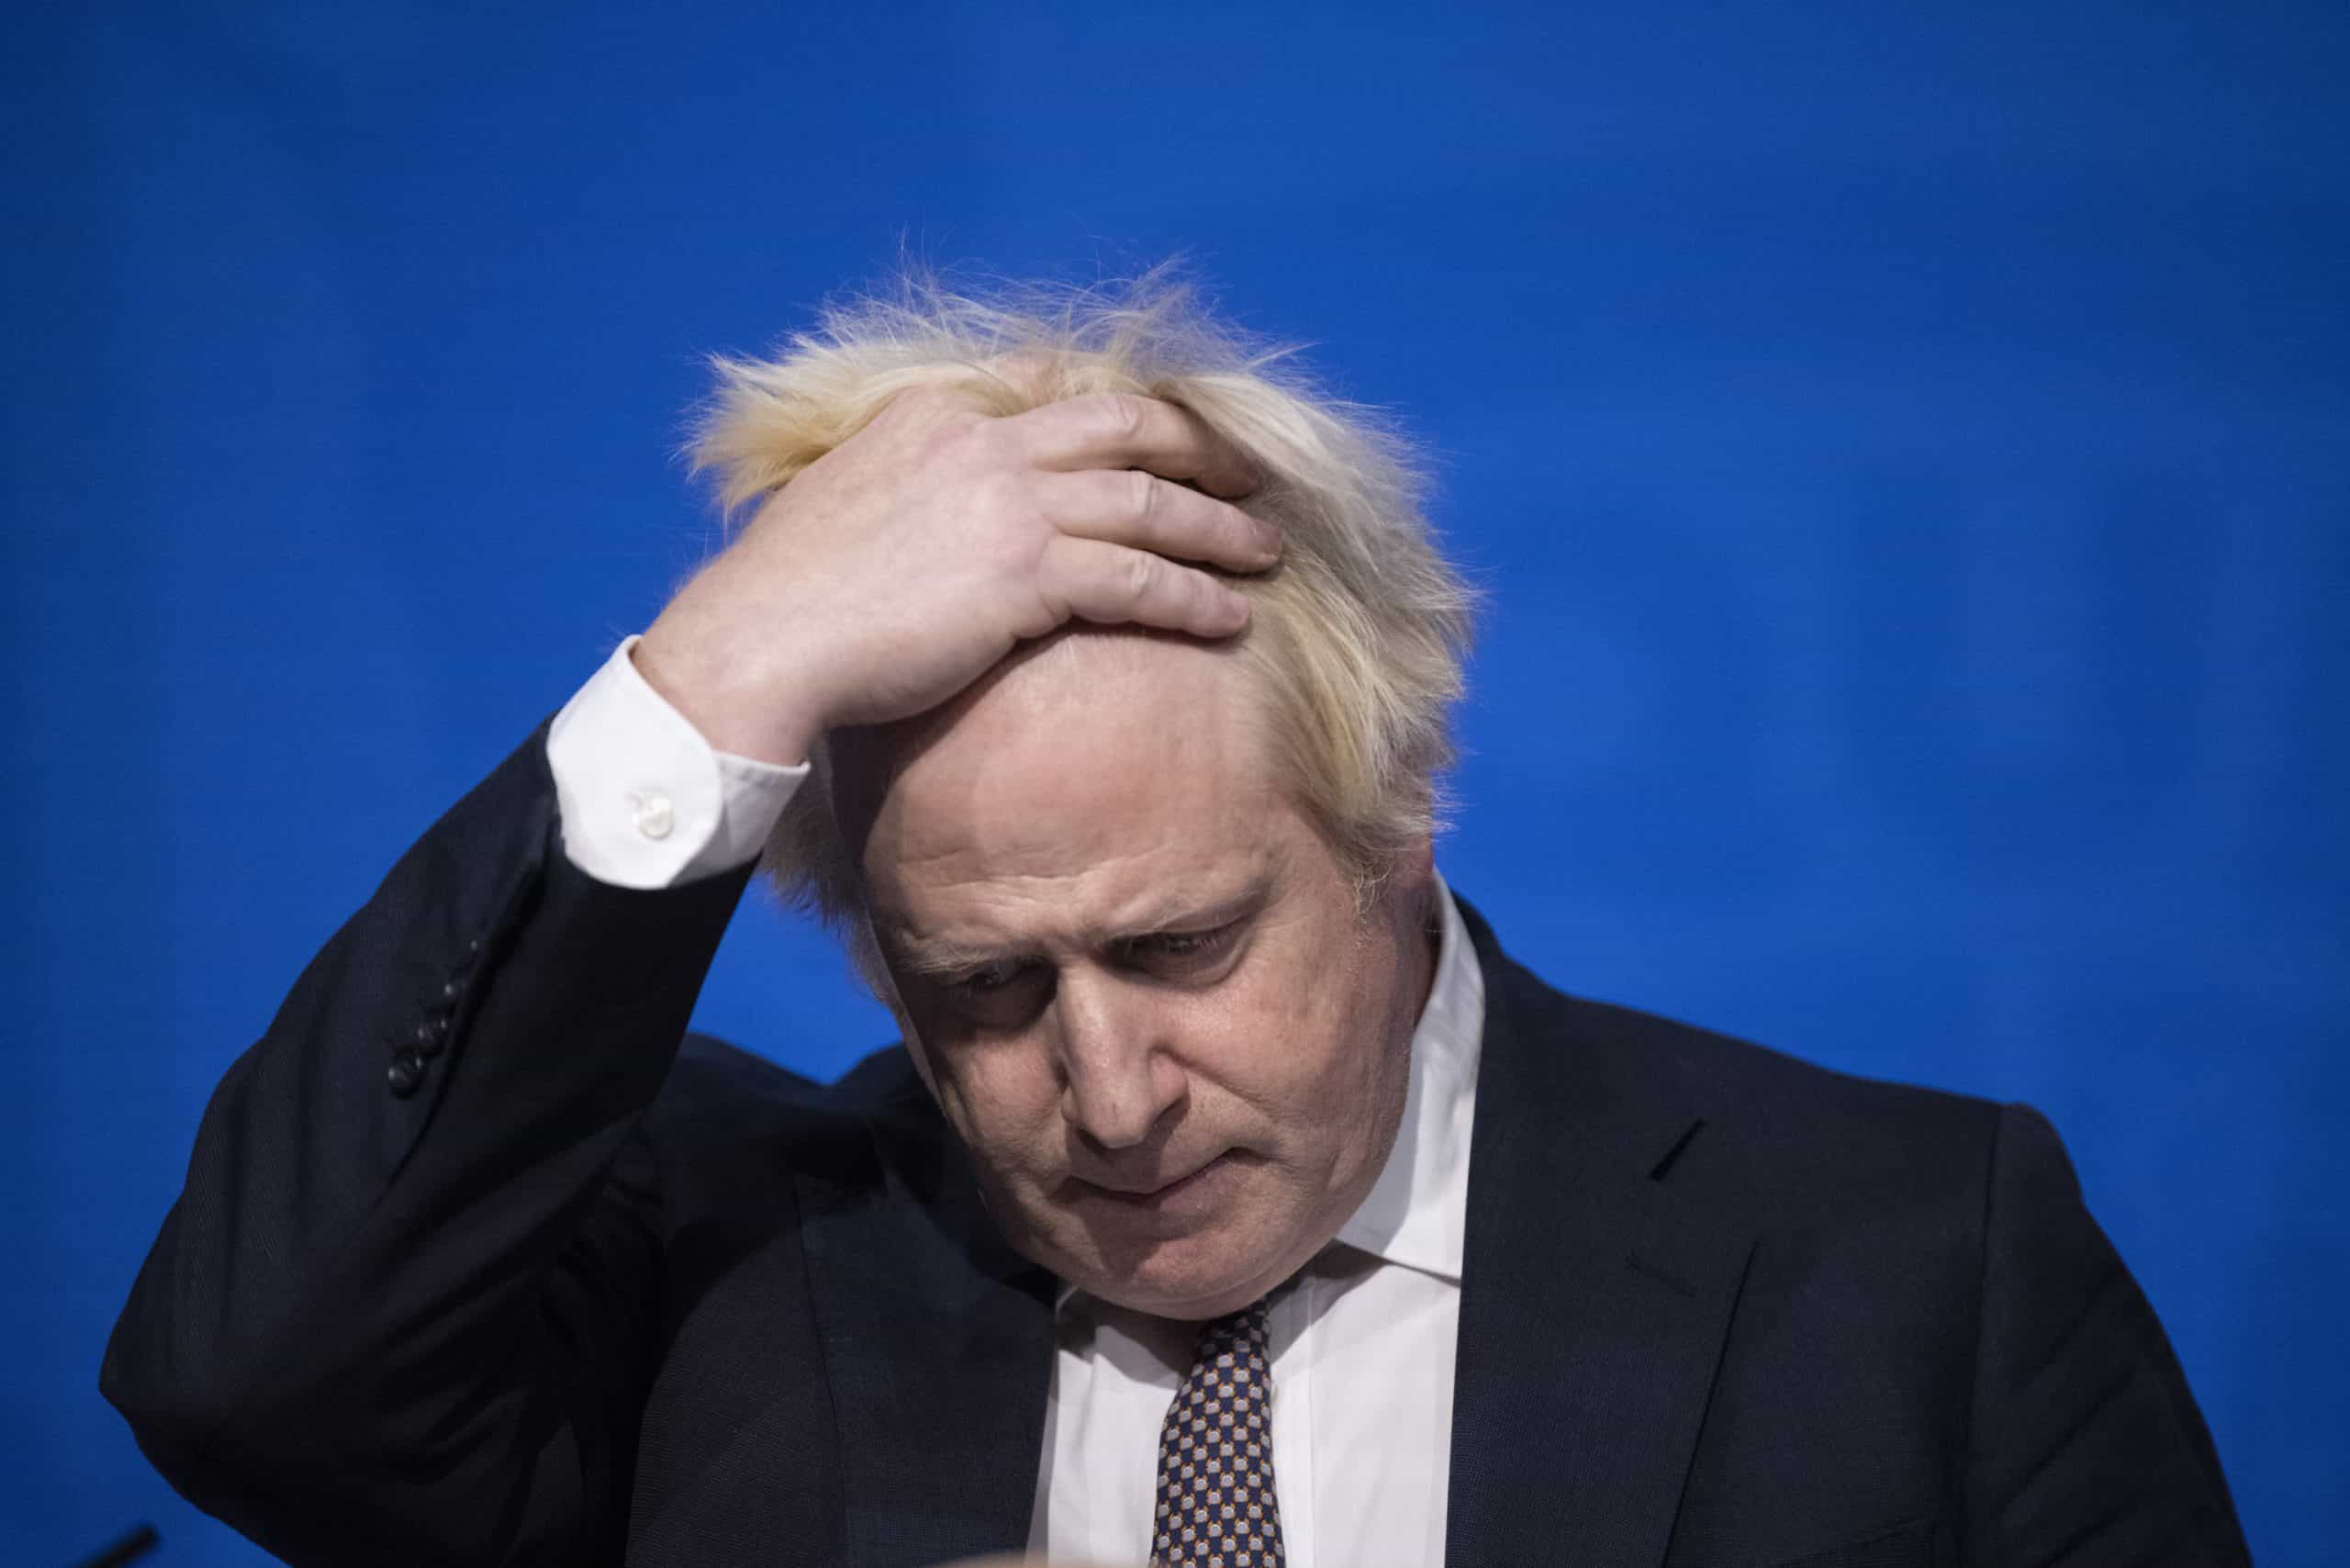 Johnson lampooned for having no clue where in the North he was in